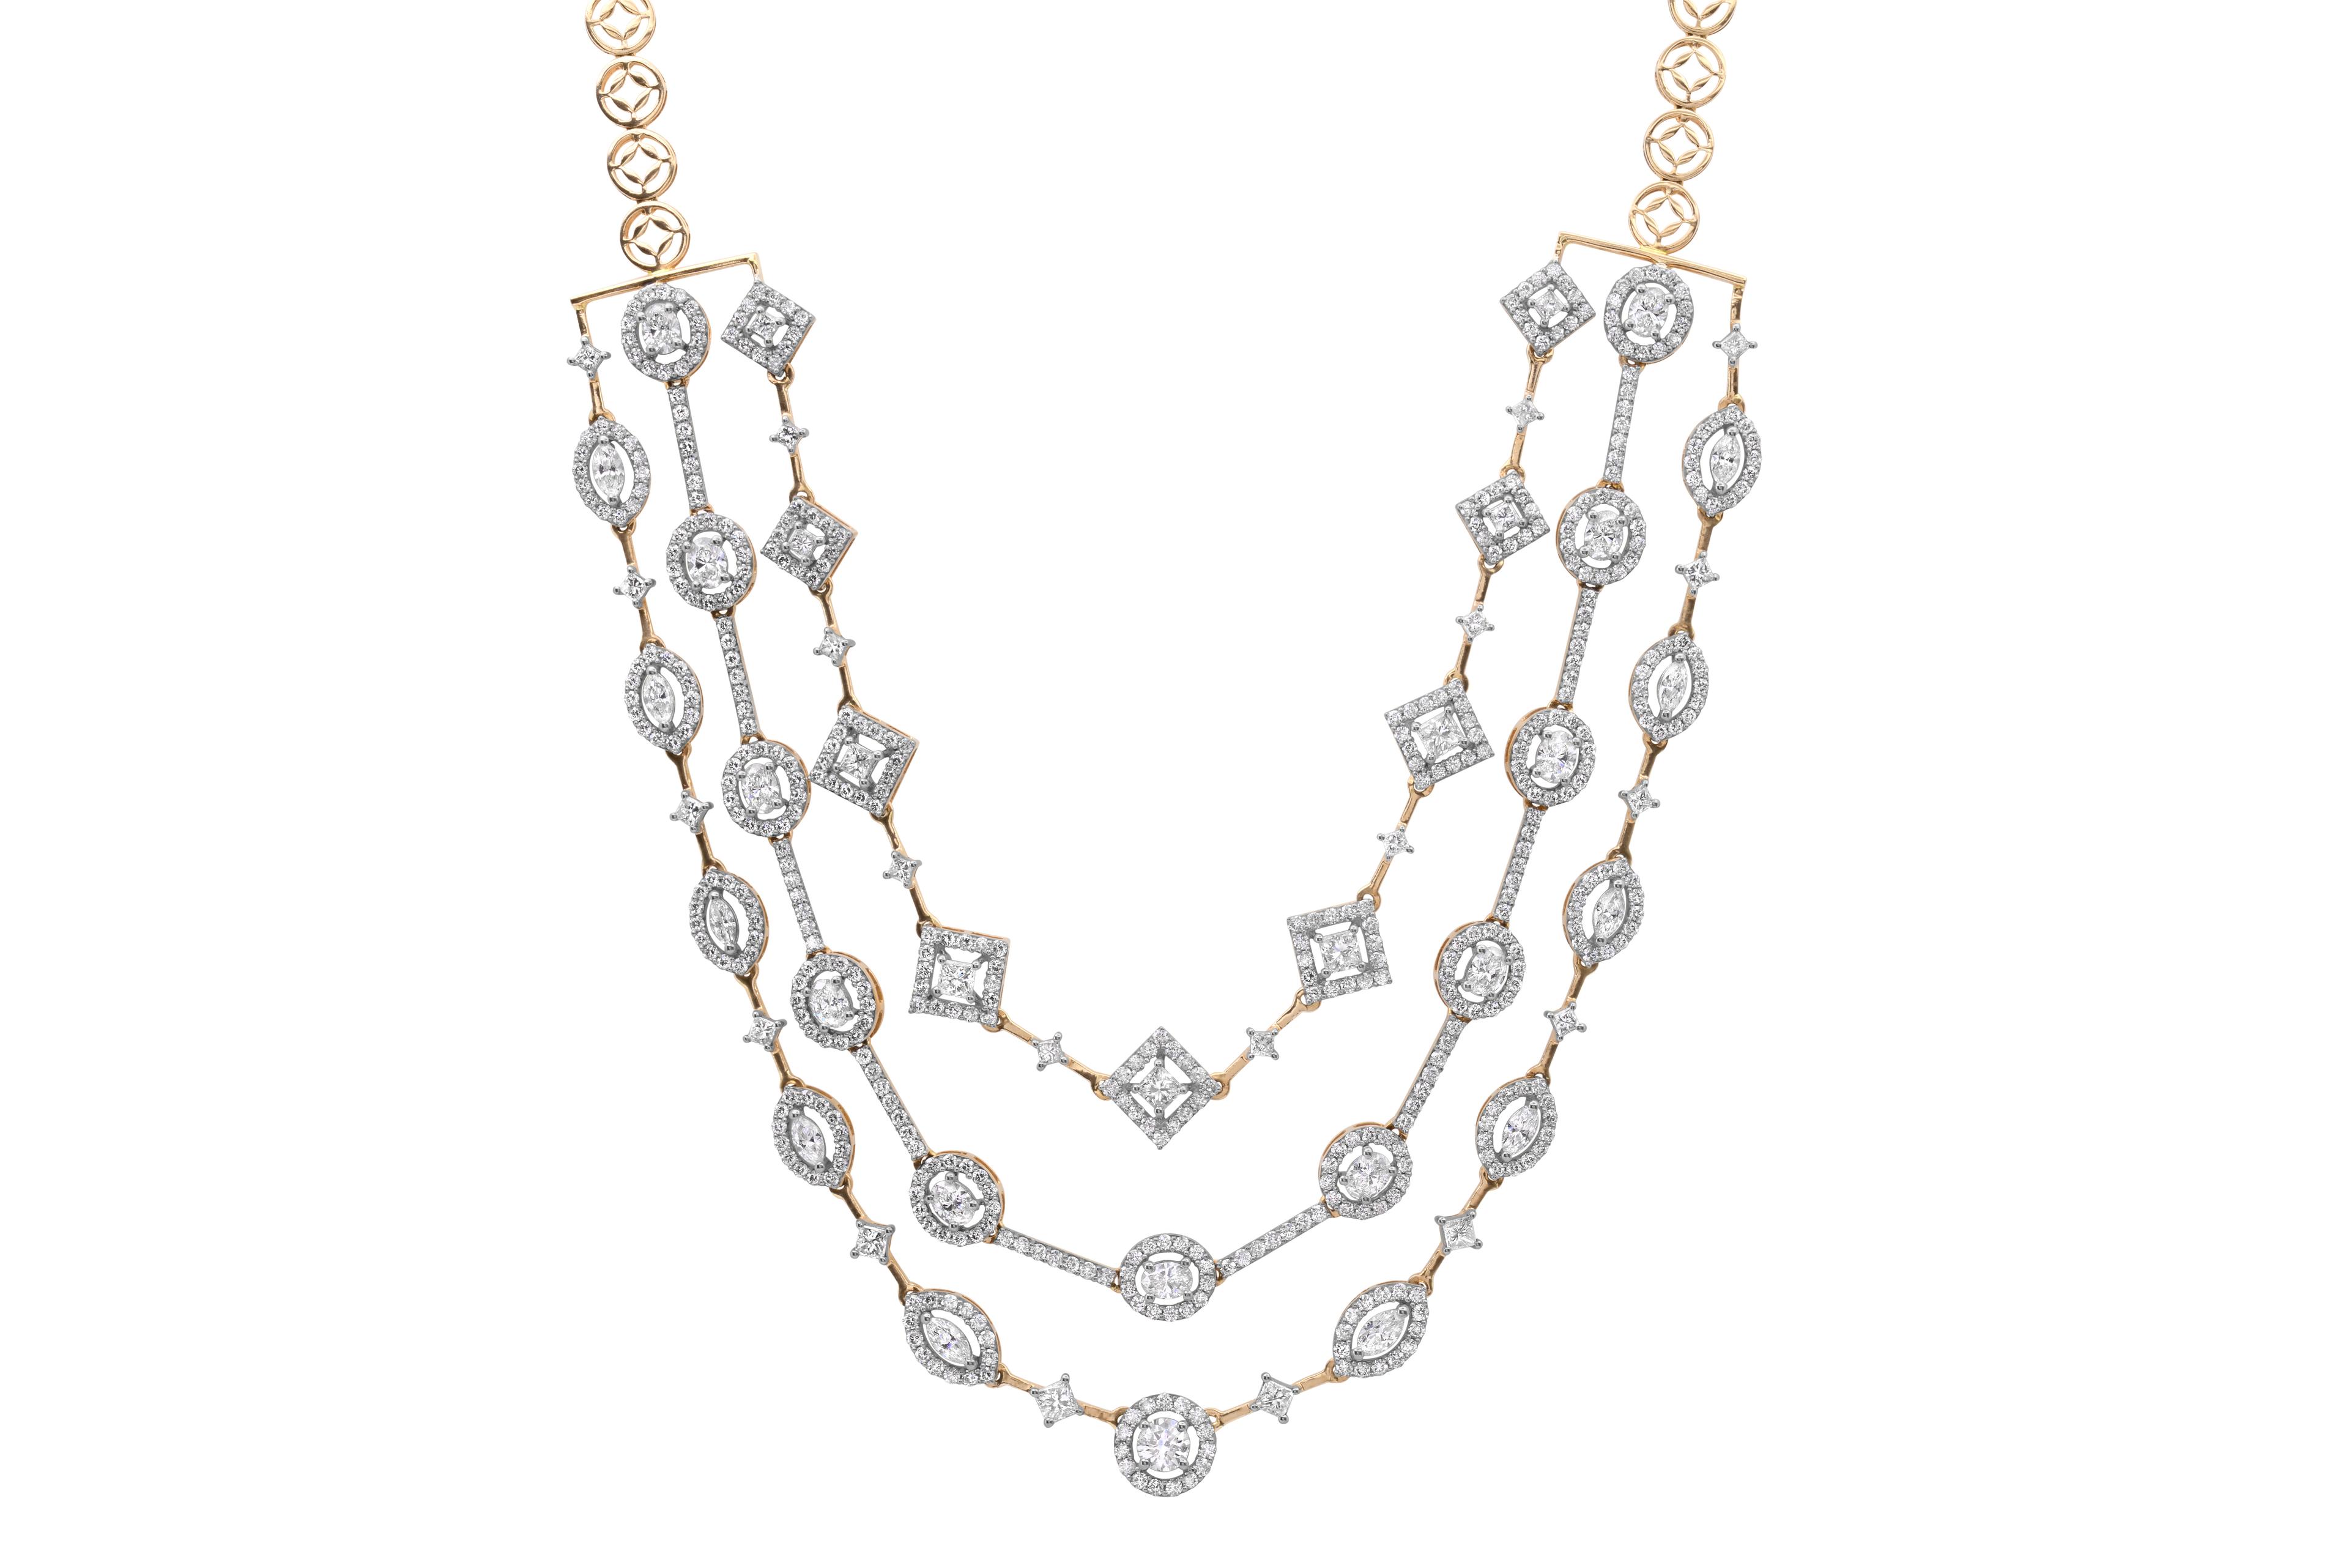 14K Rose Gold 15.59tcw Diamond Necklace and Earring Set